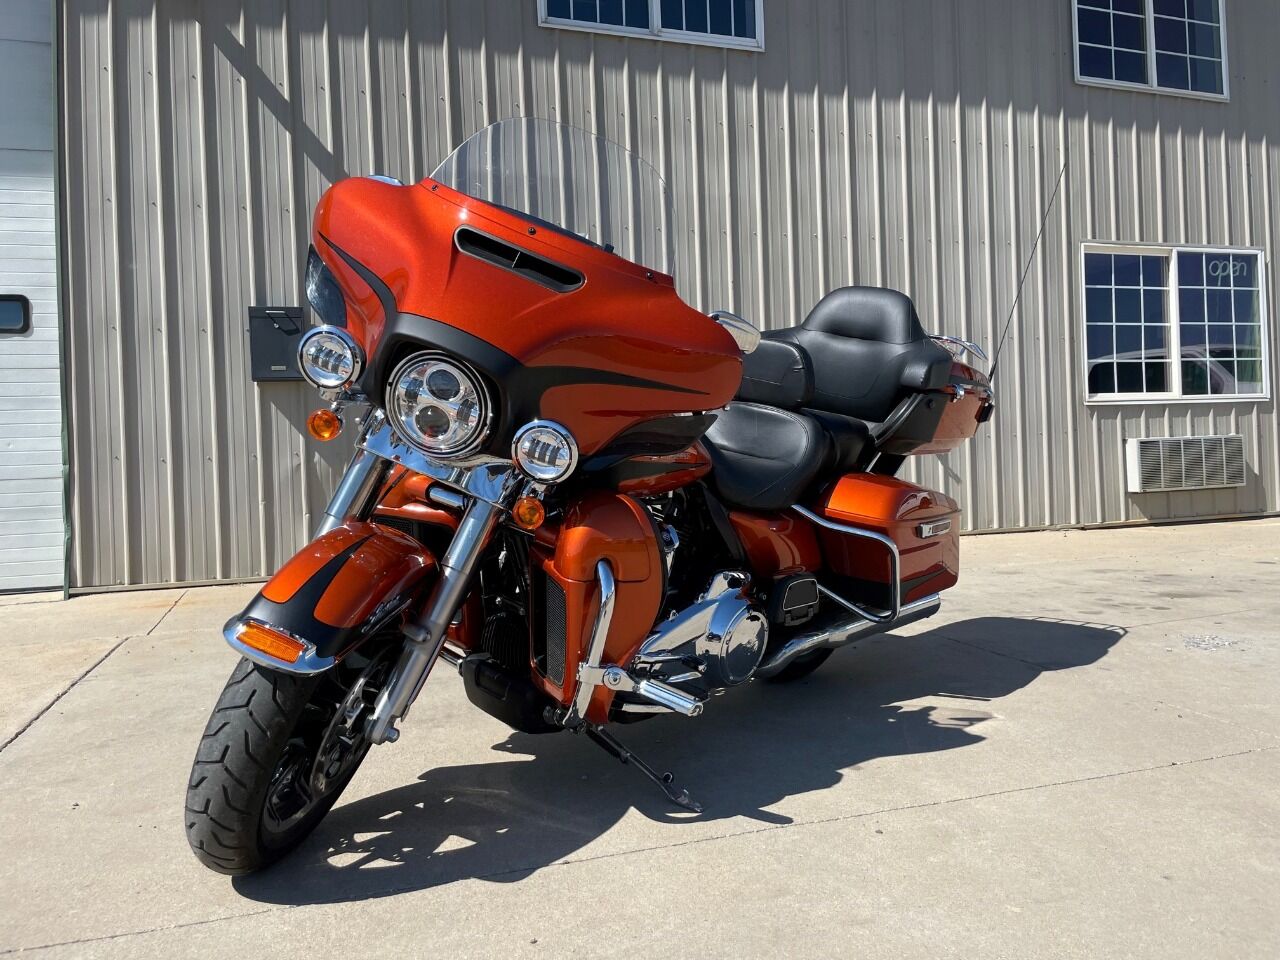 Harley Davidson For Sale In Rapid City Sd Carsforsale Com